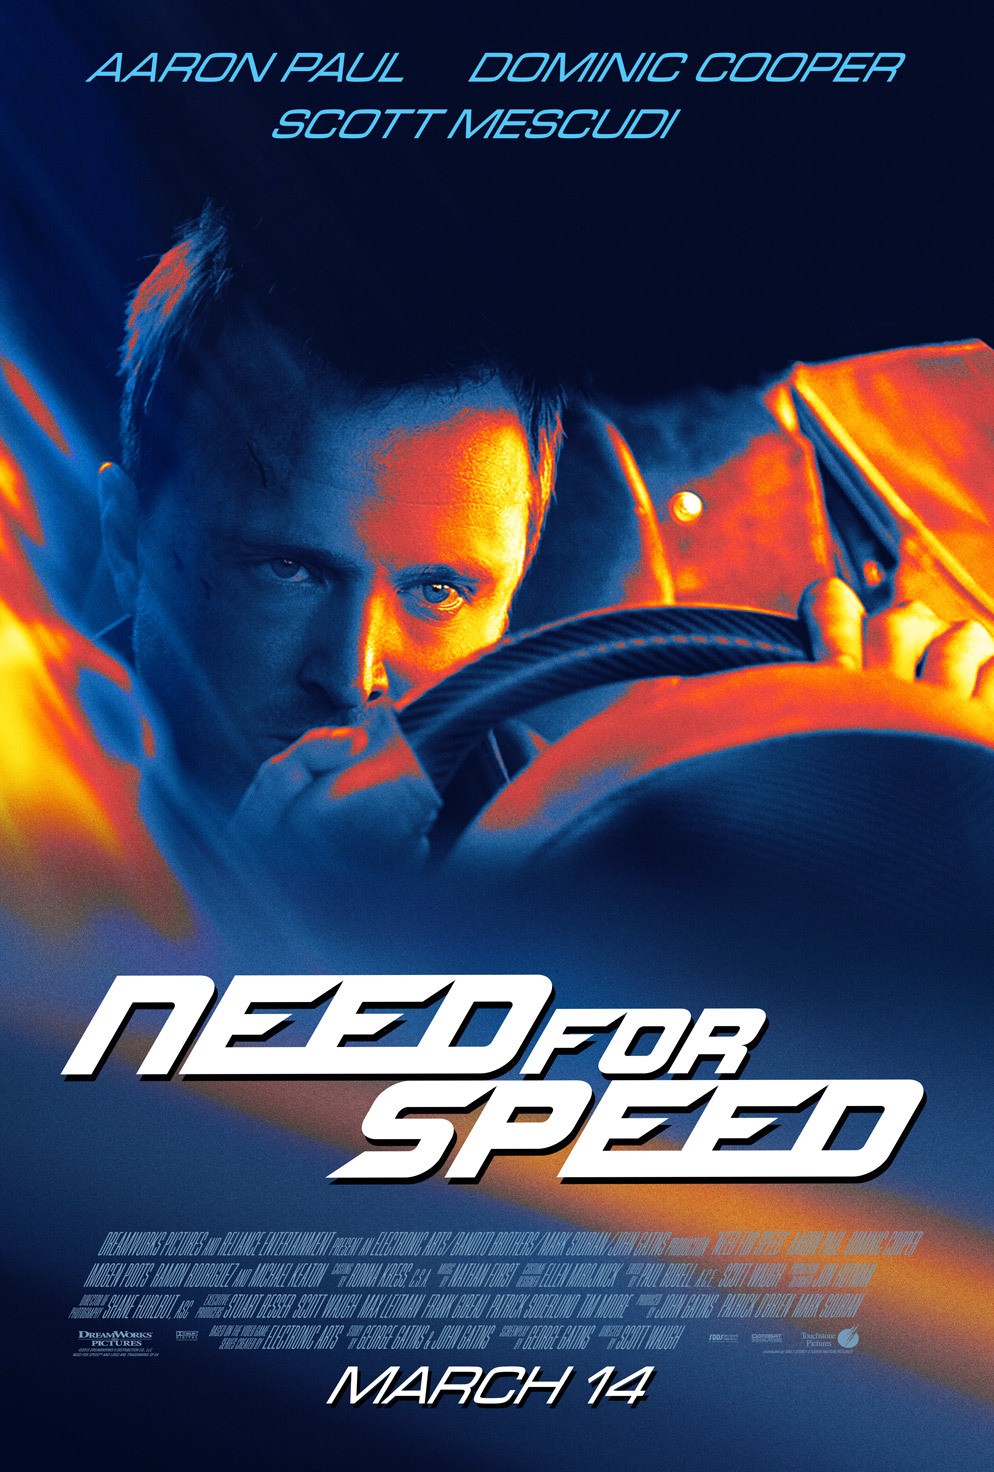 Extra Large Movie Poster Image for Need for Speed (#4 of 14)